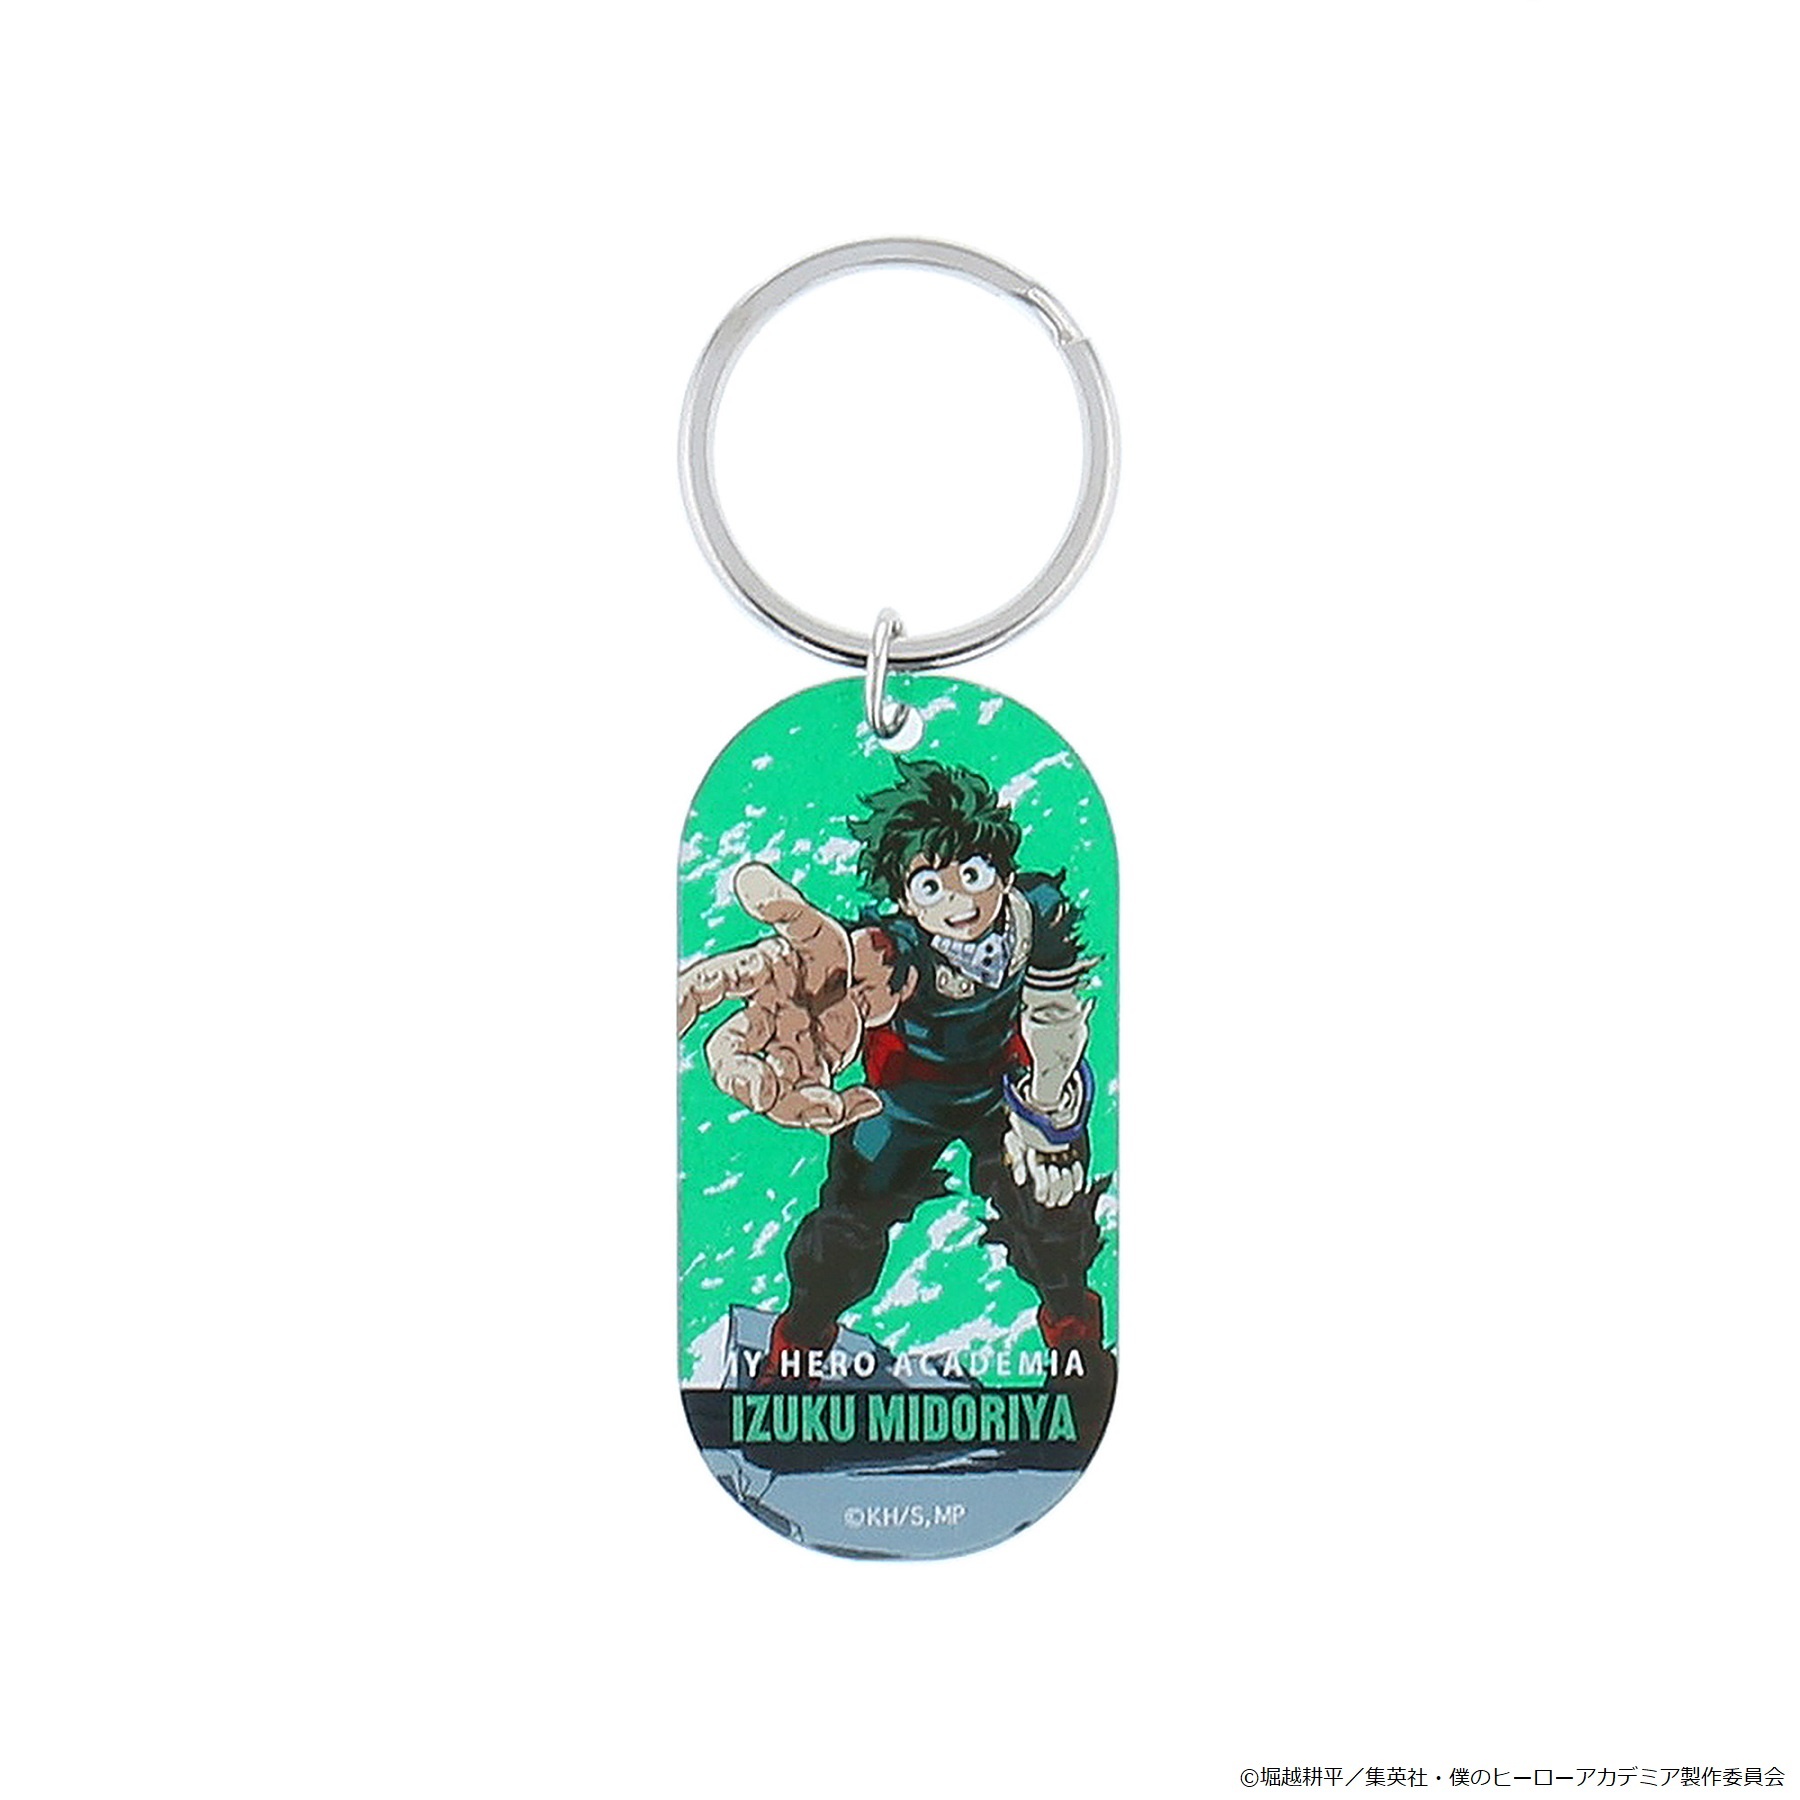 My Hero Academia: Trading Metallic Acrylic Keychain Reach Out For Any ...